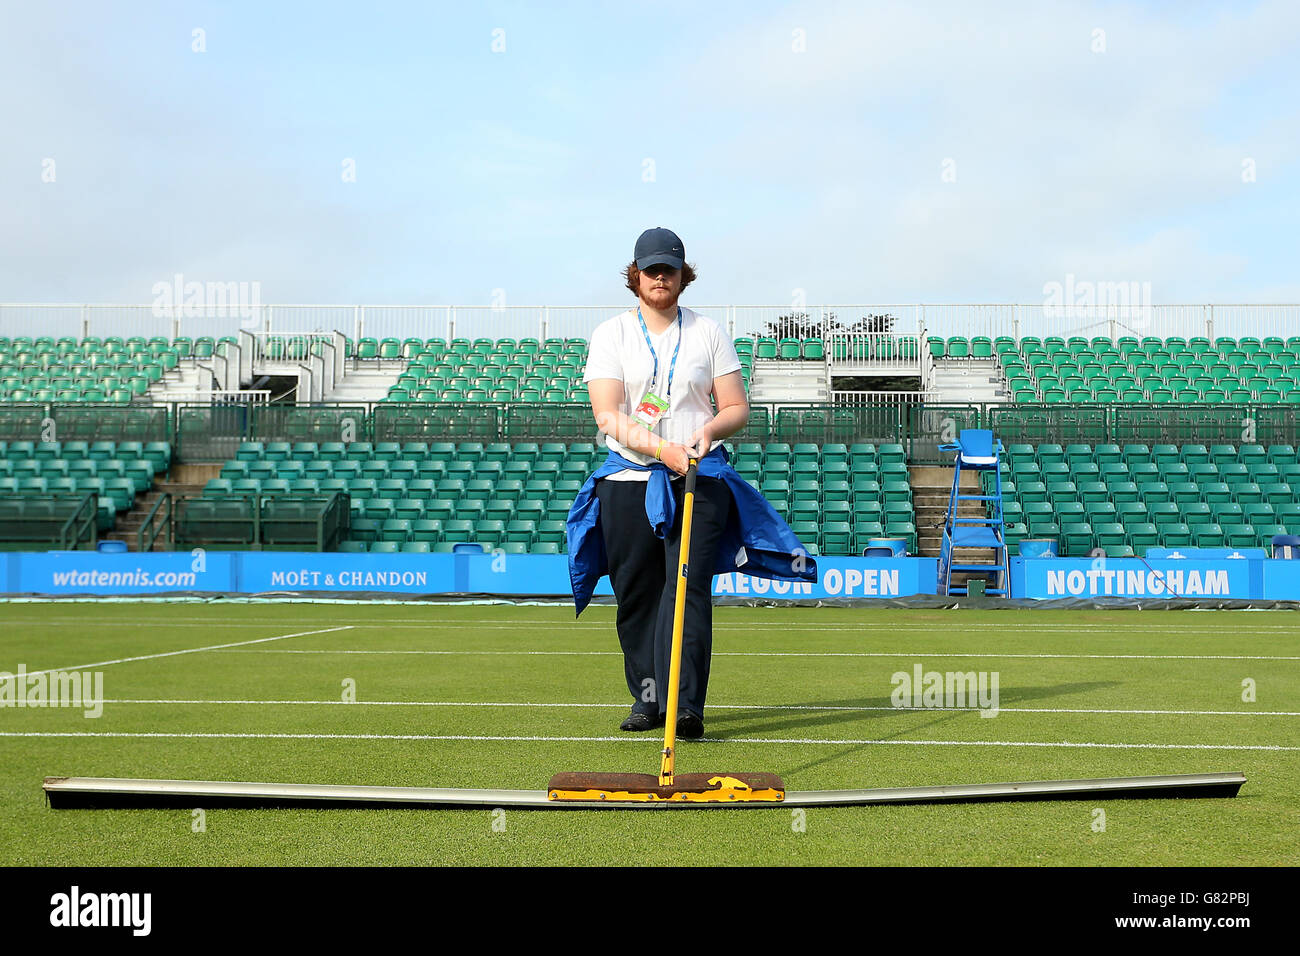 Tennis - 2015 Aegon Open Nottingham - Day Five - Nottingham Tennis Centre. Ground staff prepare centre court prior to the start of play Stock Photo